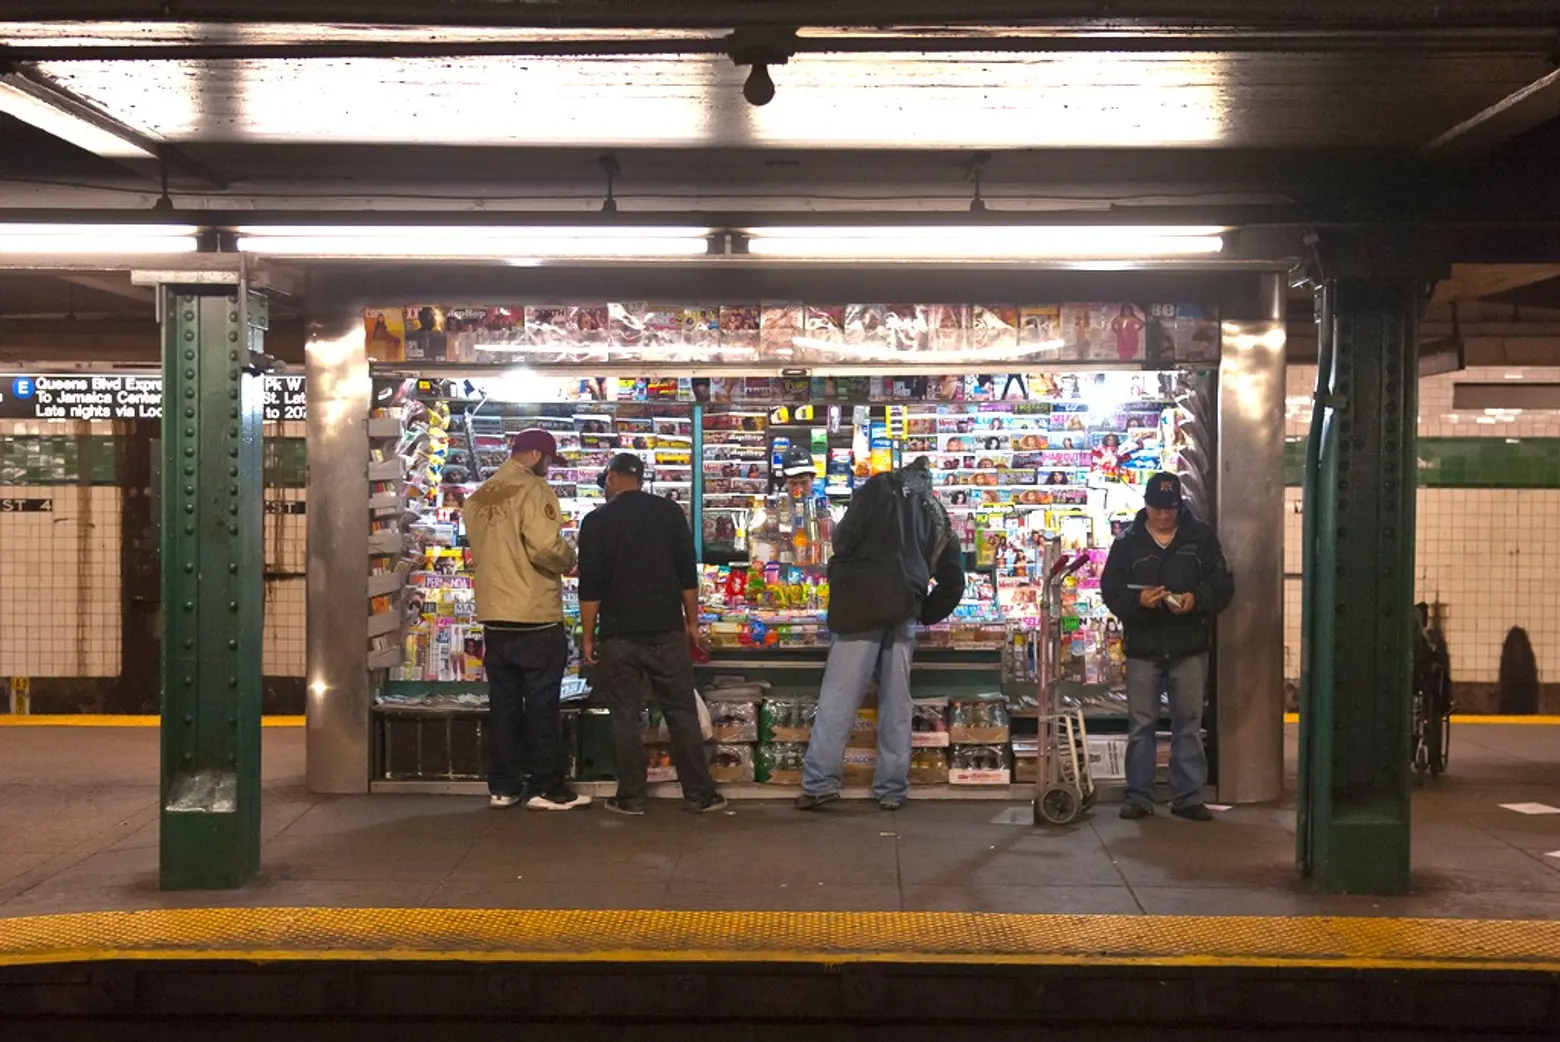 Some NYC subway newsstands will be replaced by vending machines